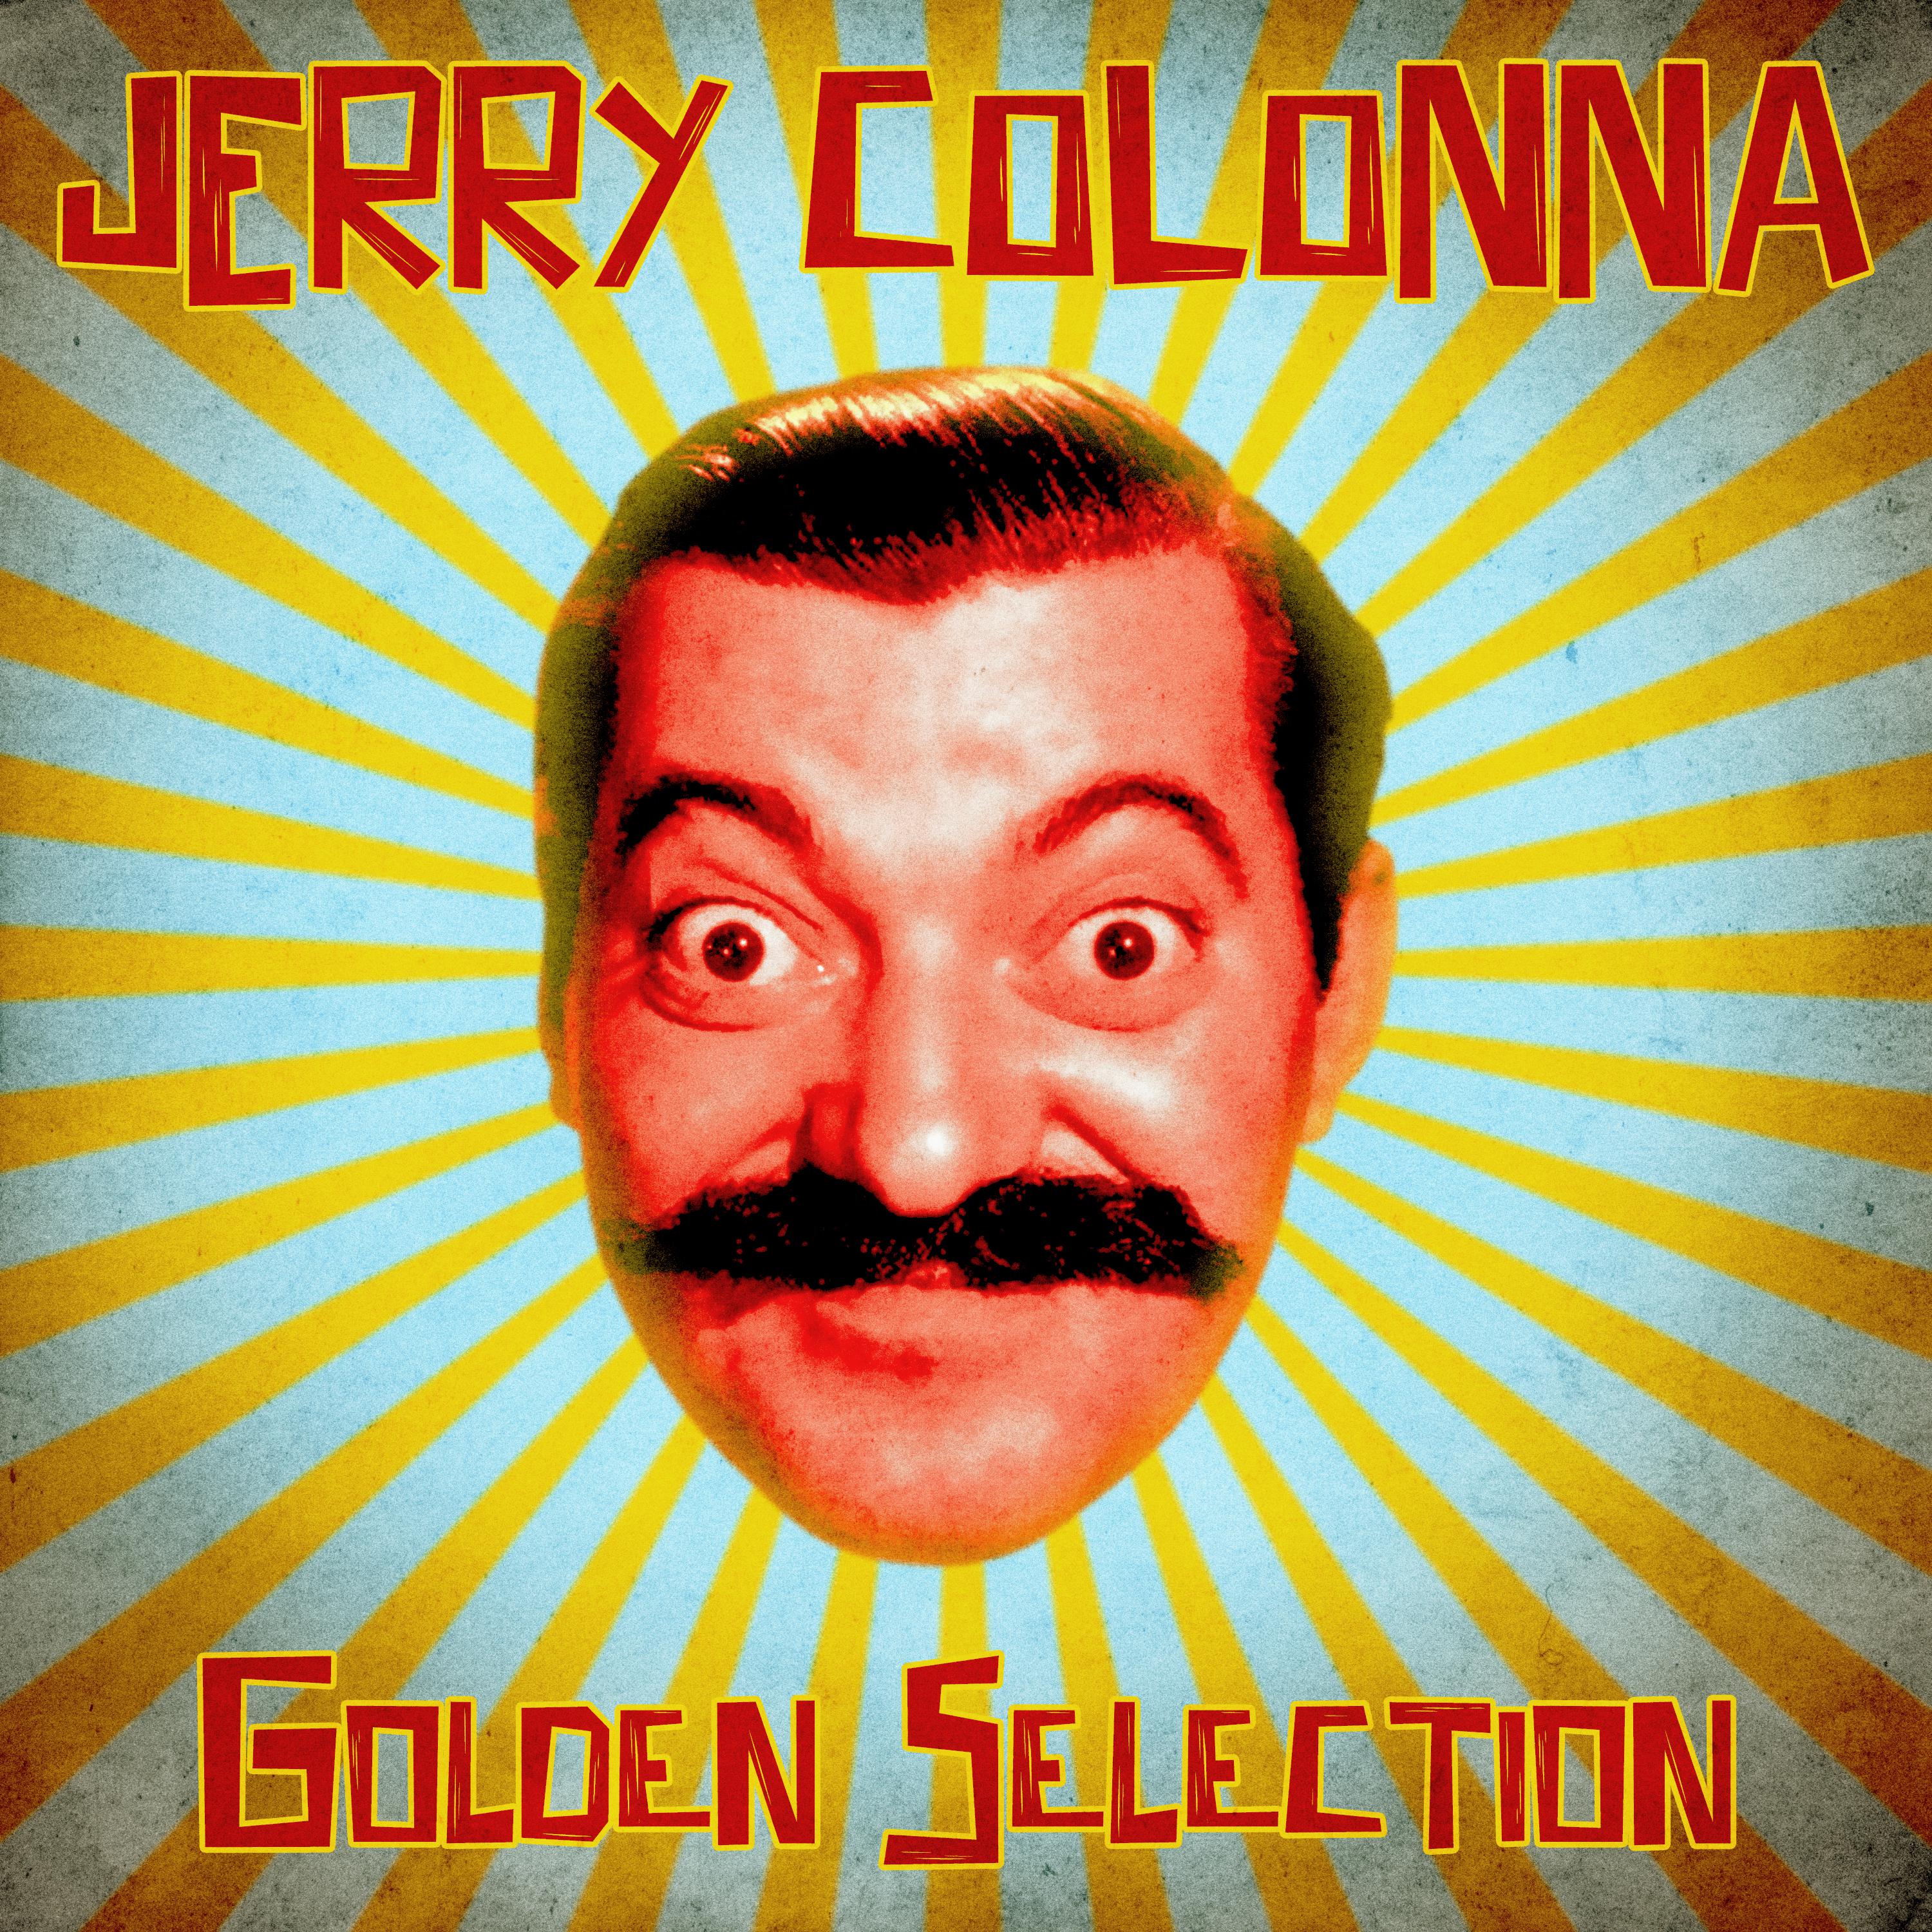 Jerry Colonna - Soft Shoulders (Remastered)